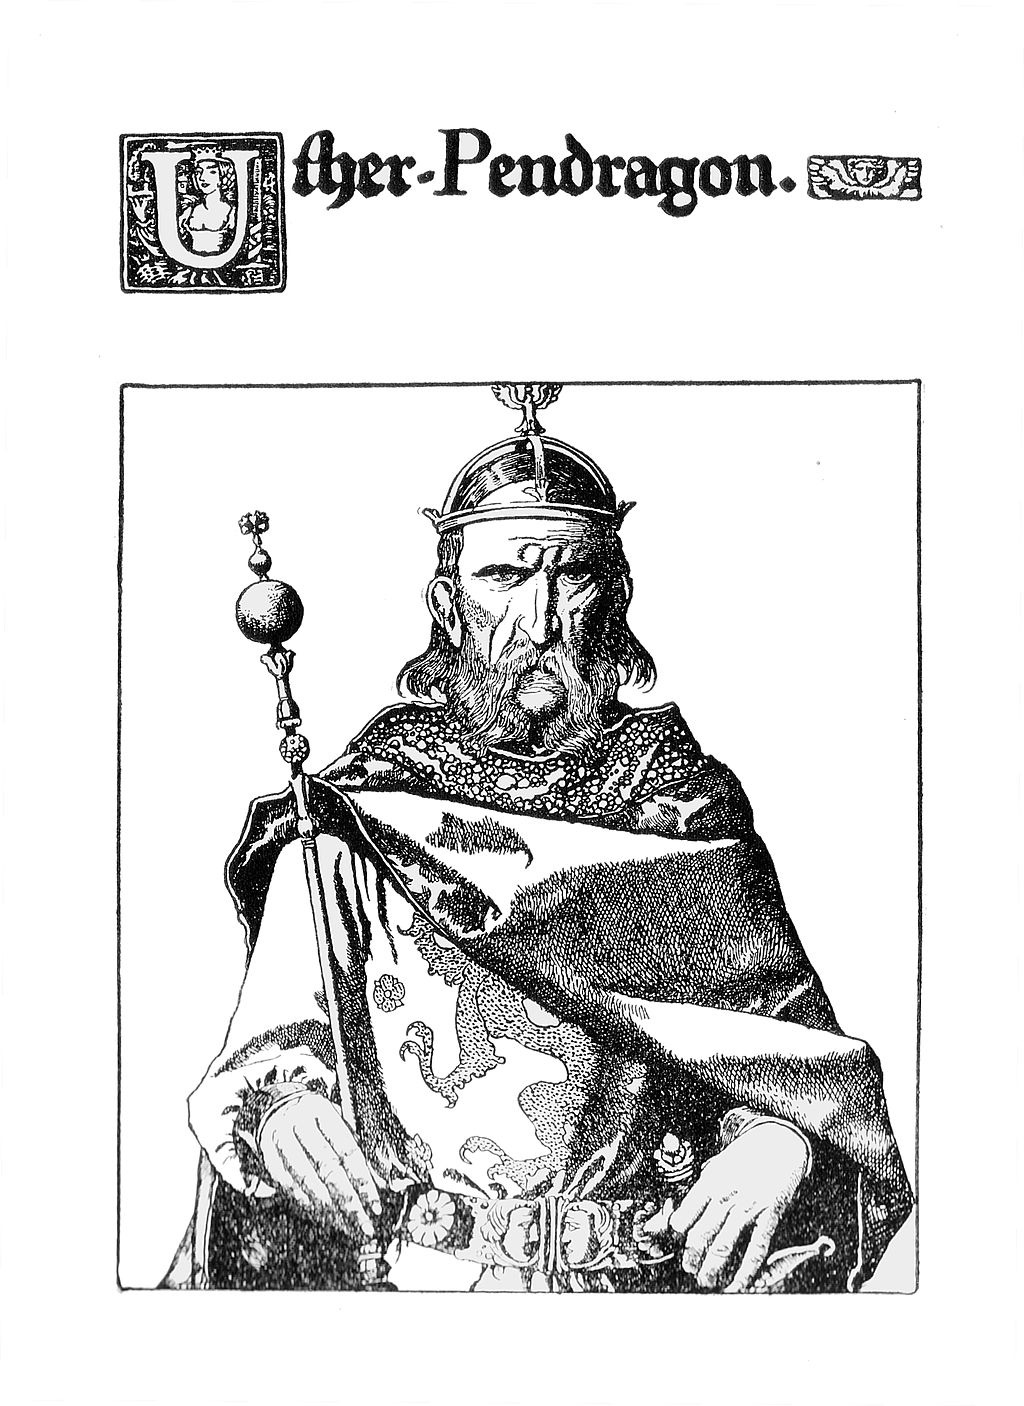 Uther Pendragon: king and father of King Arthur in the Arthurian Legends. Uther Pendragon was a king of Brittany who fought against the Saxons, and the father of King Arthur.This drawing is an illustration by Howard Pyle (1903)